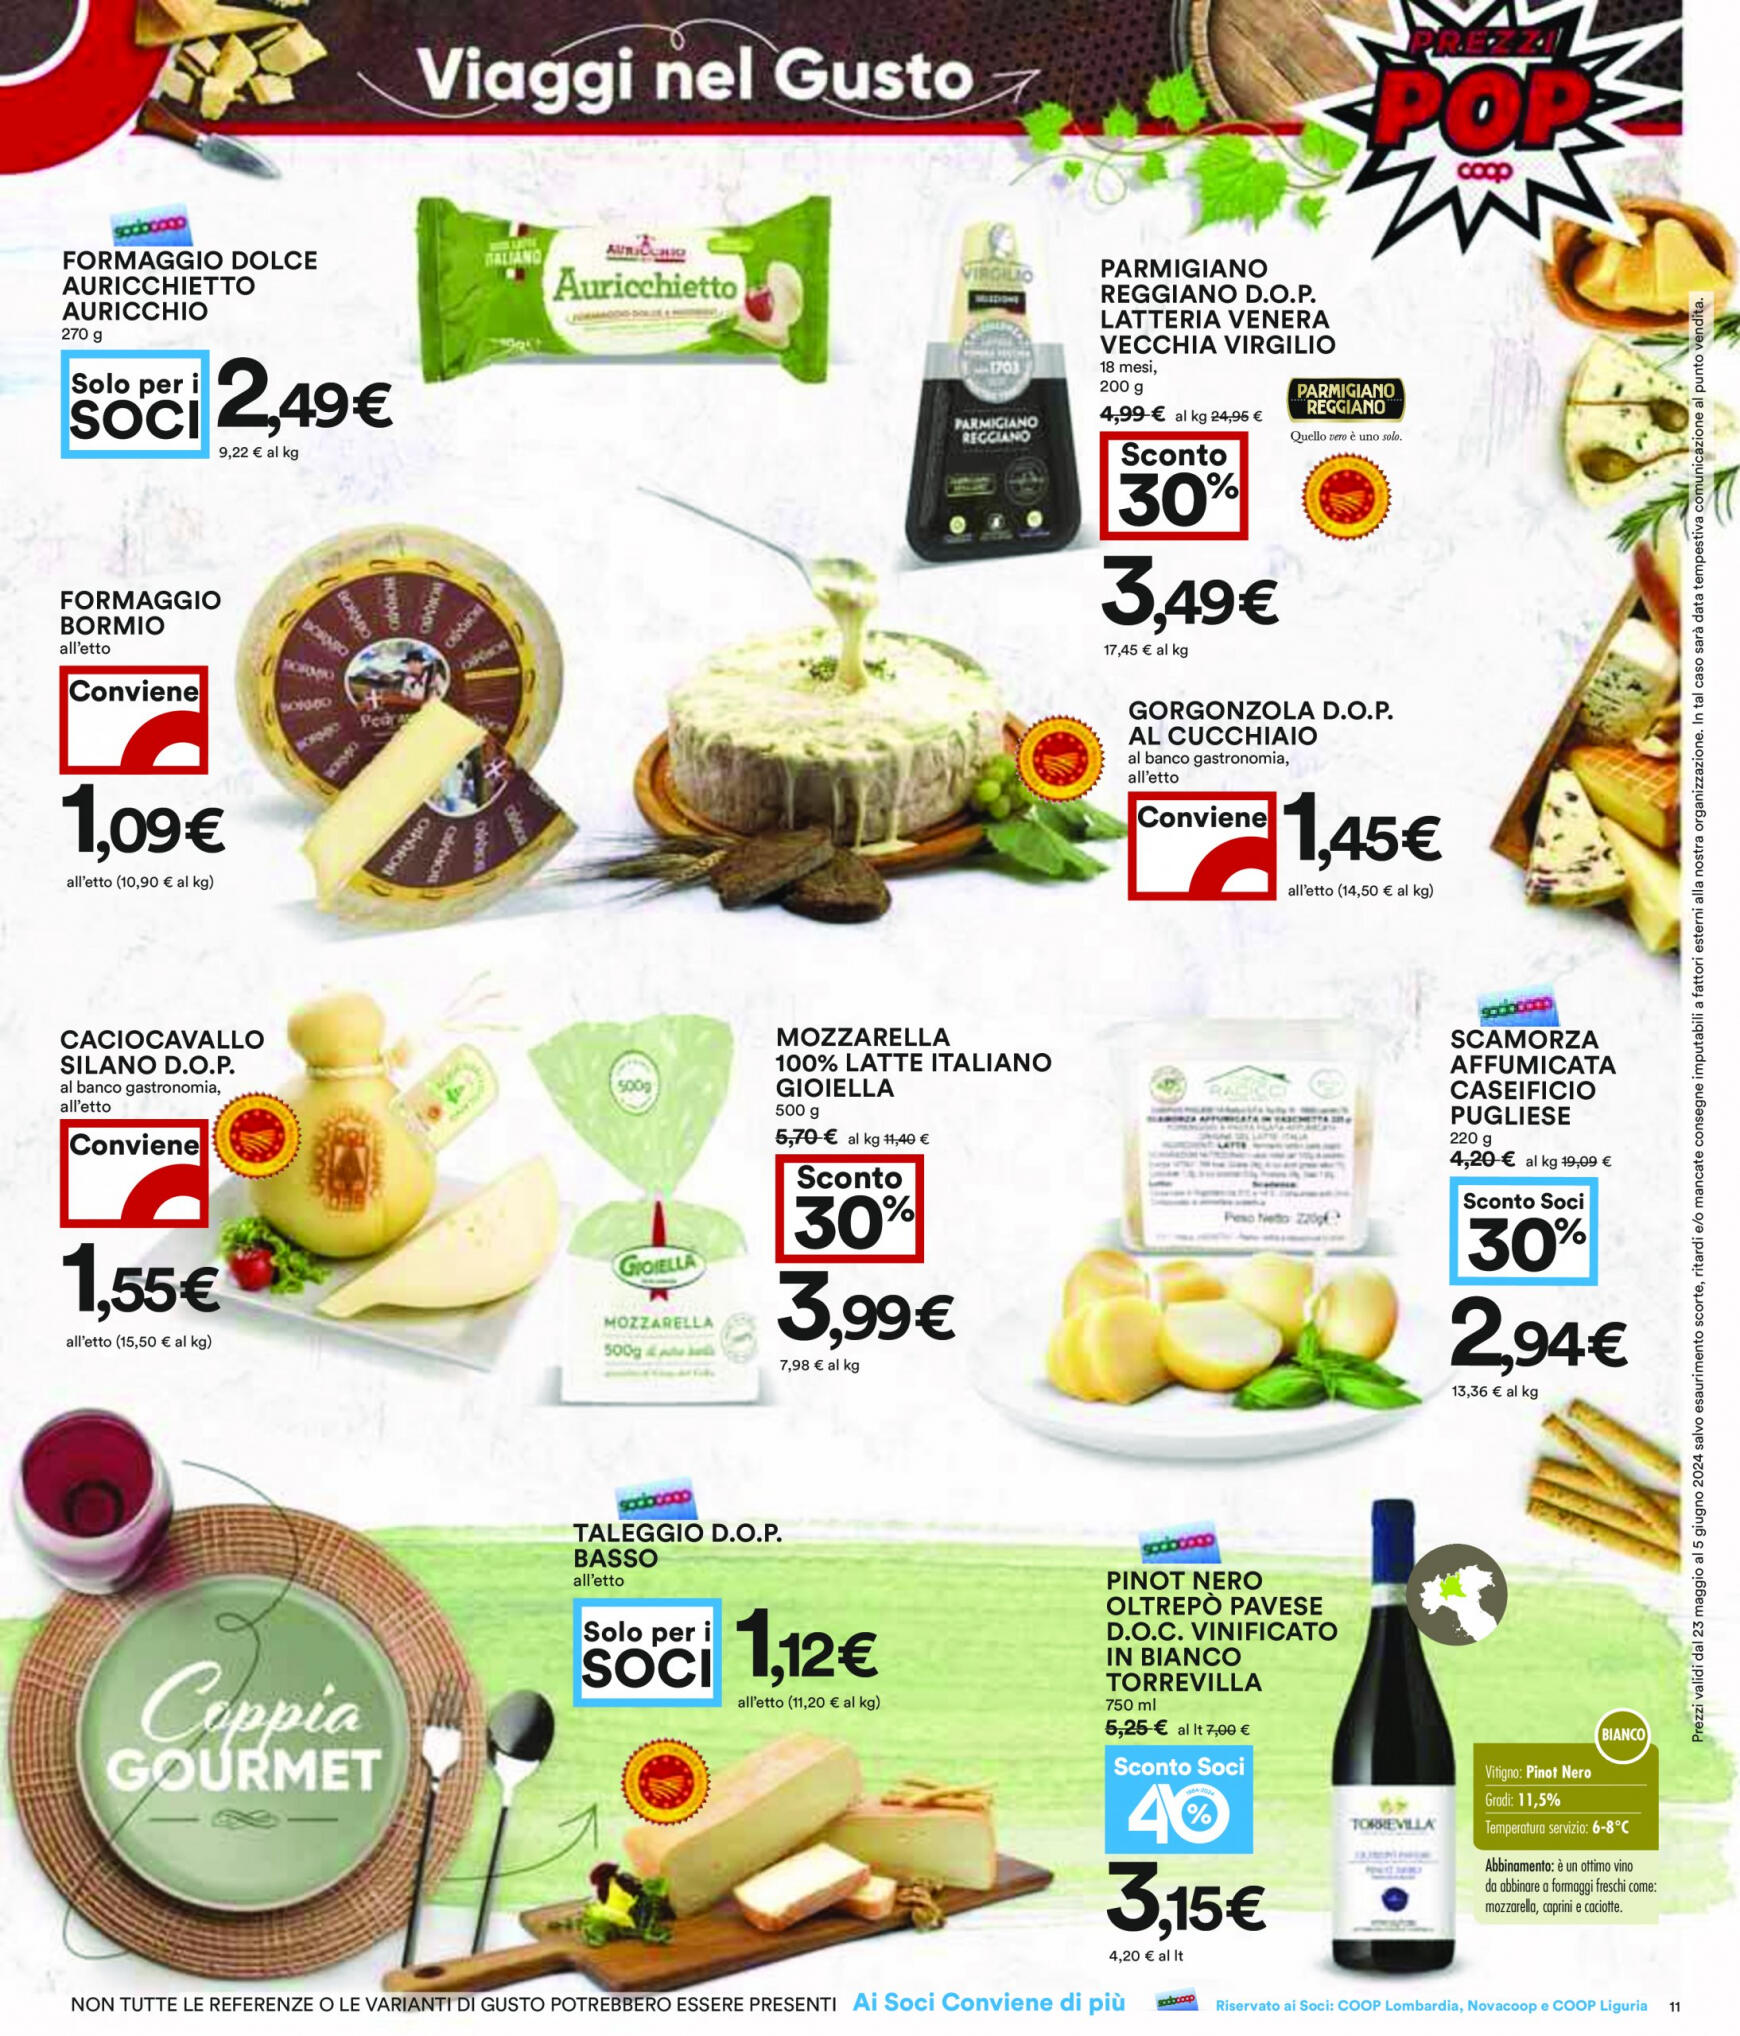 coop - Nuovo volantino Coop 23.05. - 05.06. - page: 11